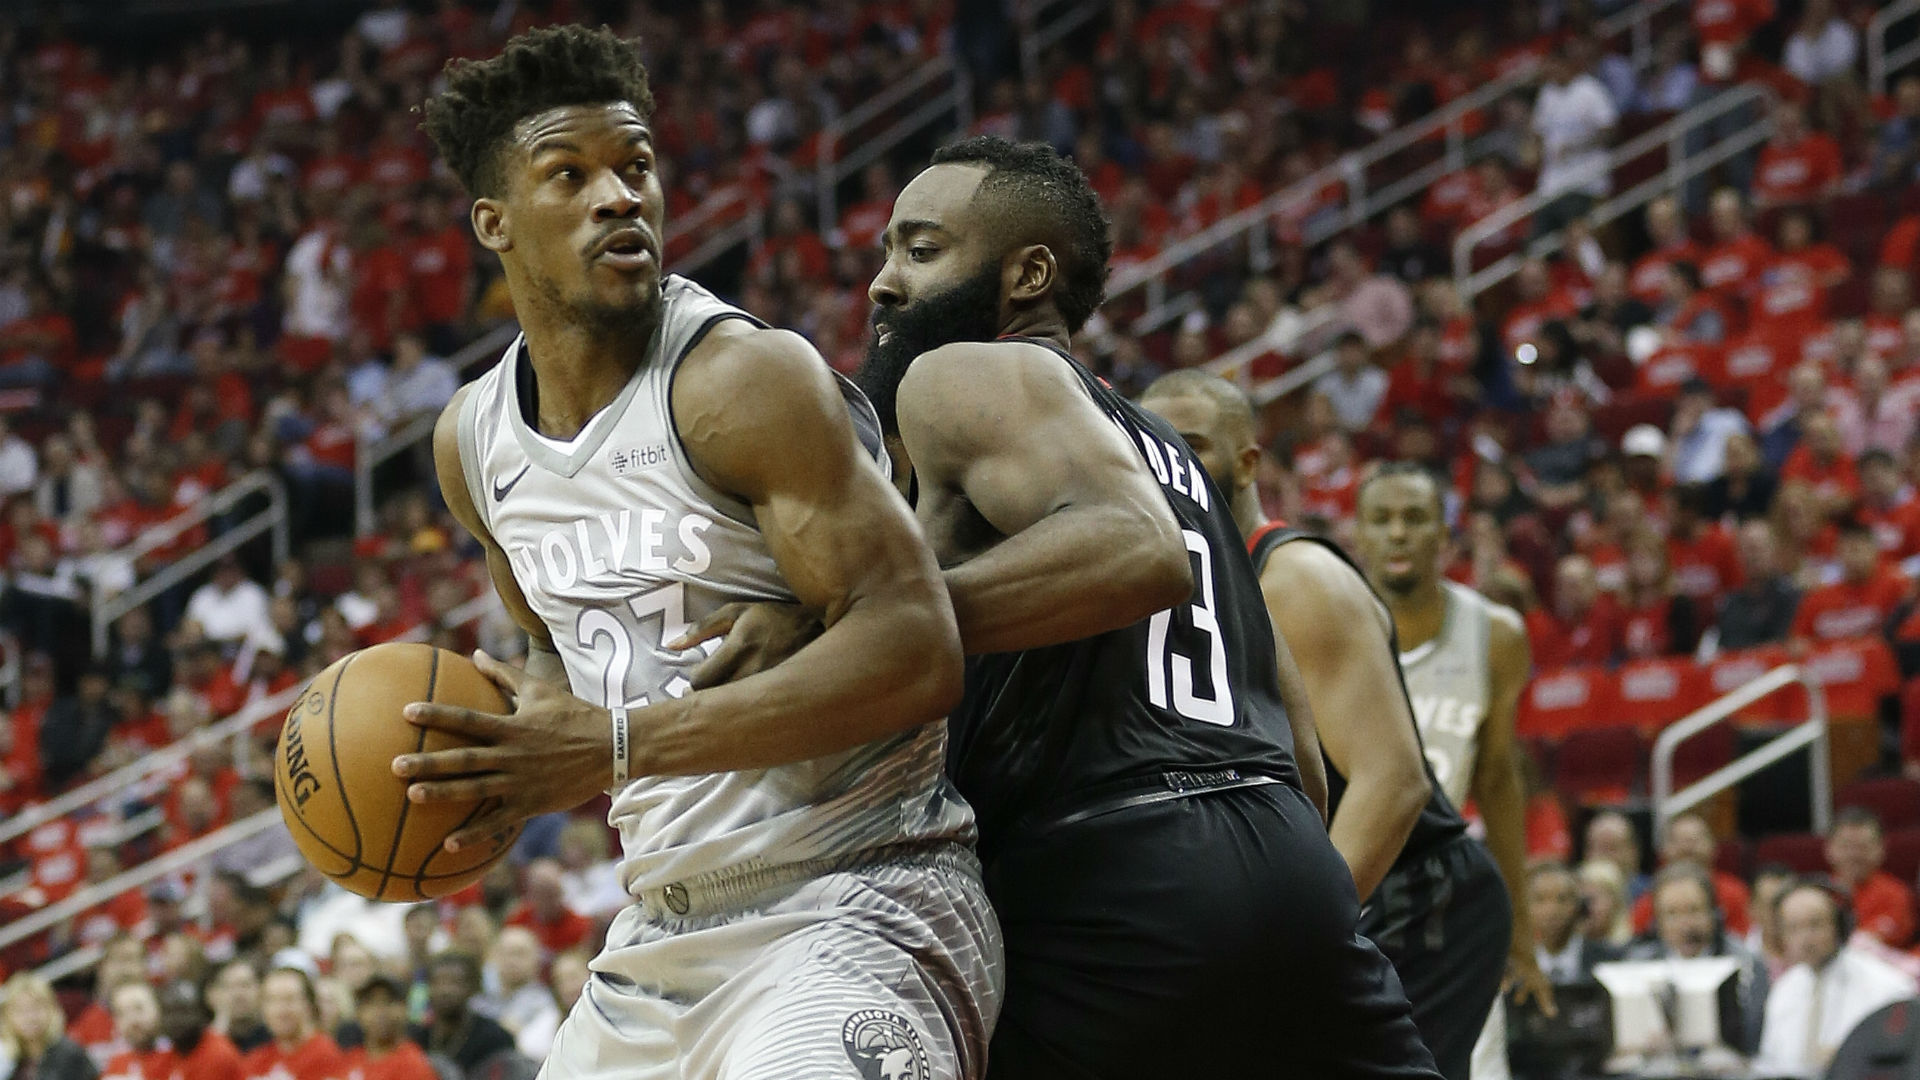 NBA trade rumors: Should Rockets go all-in on Jimmy Butler? | NBA | Sporting News1920 x 1080